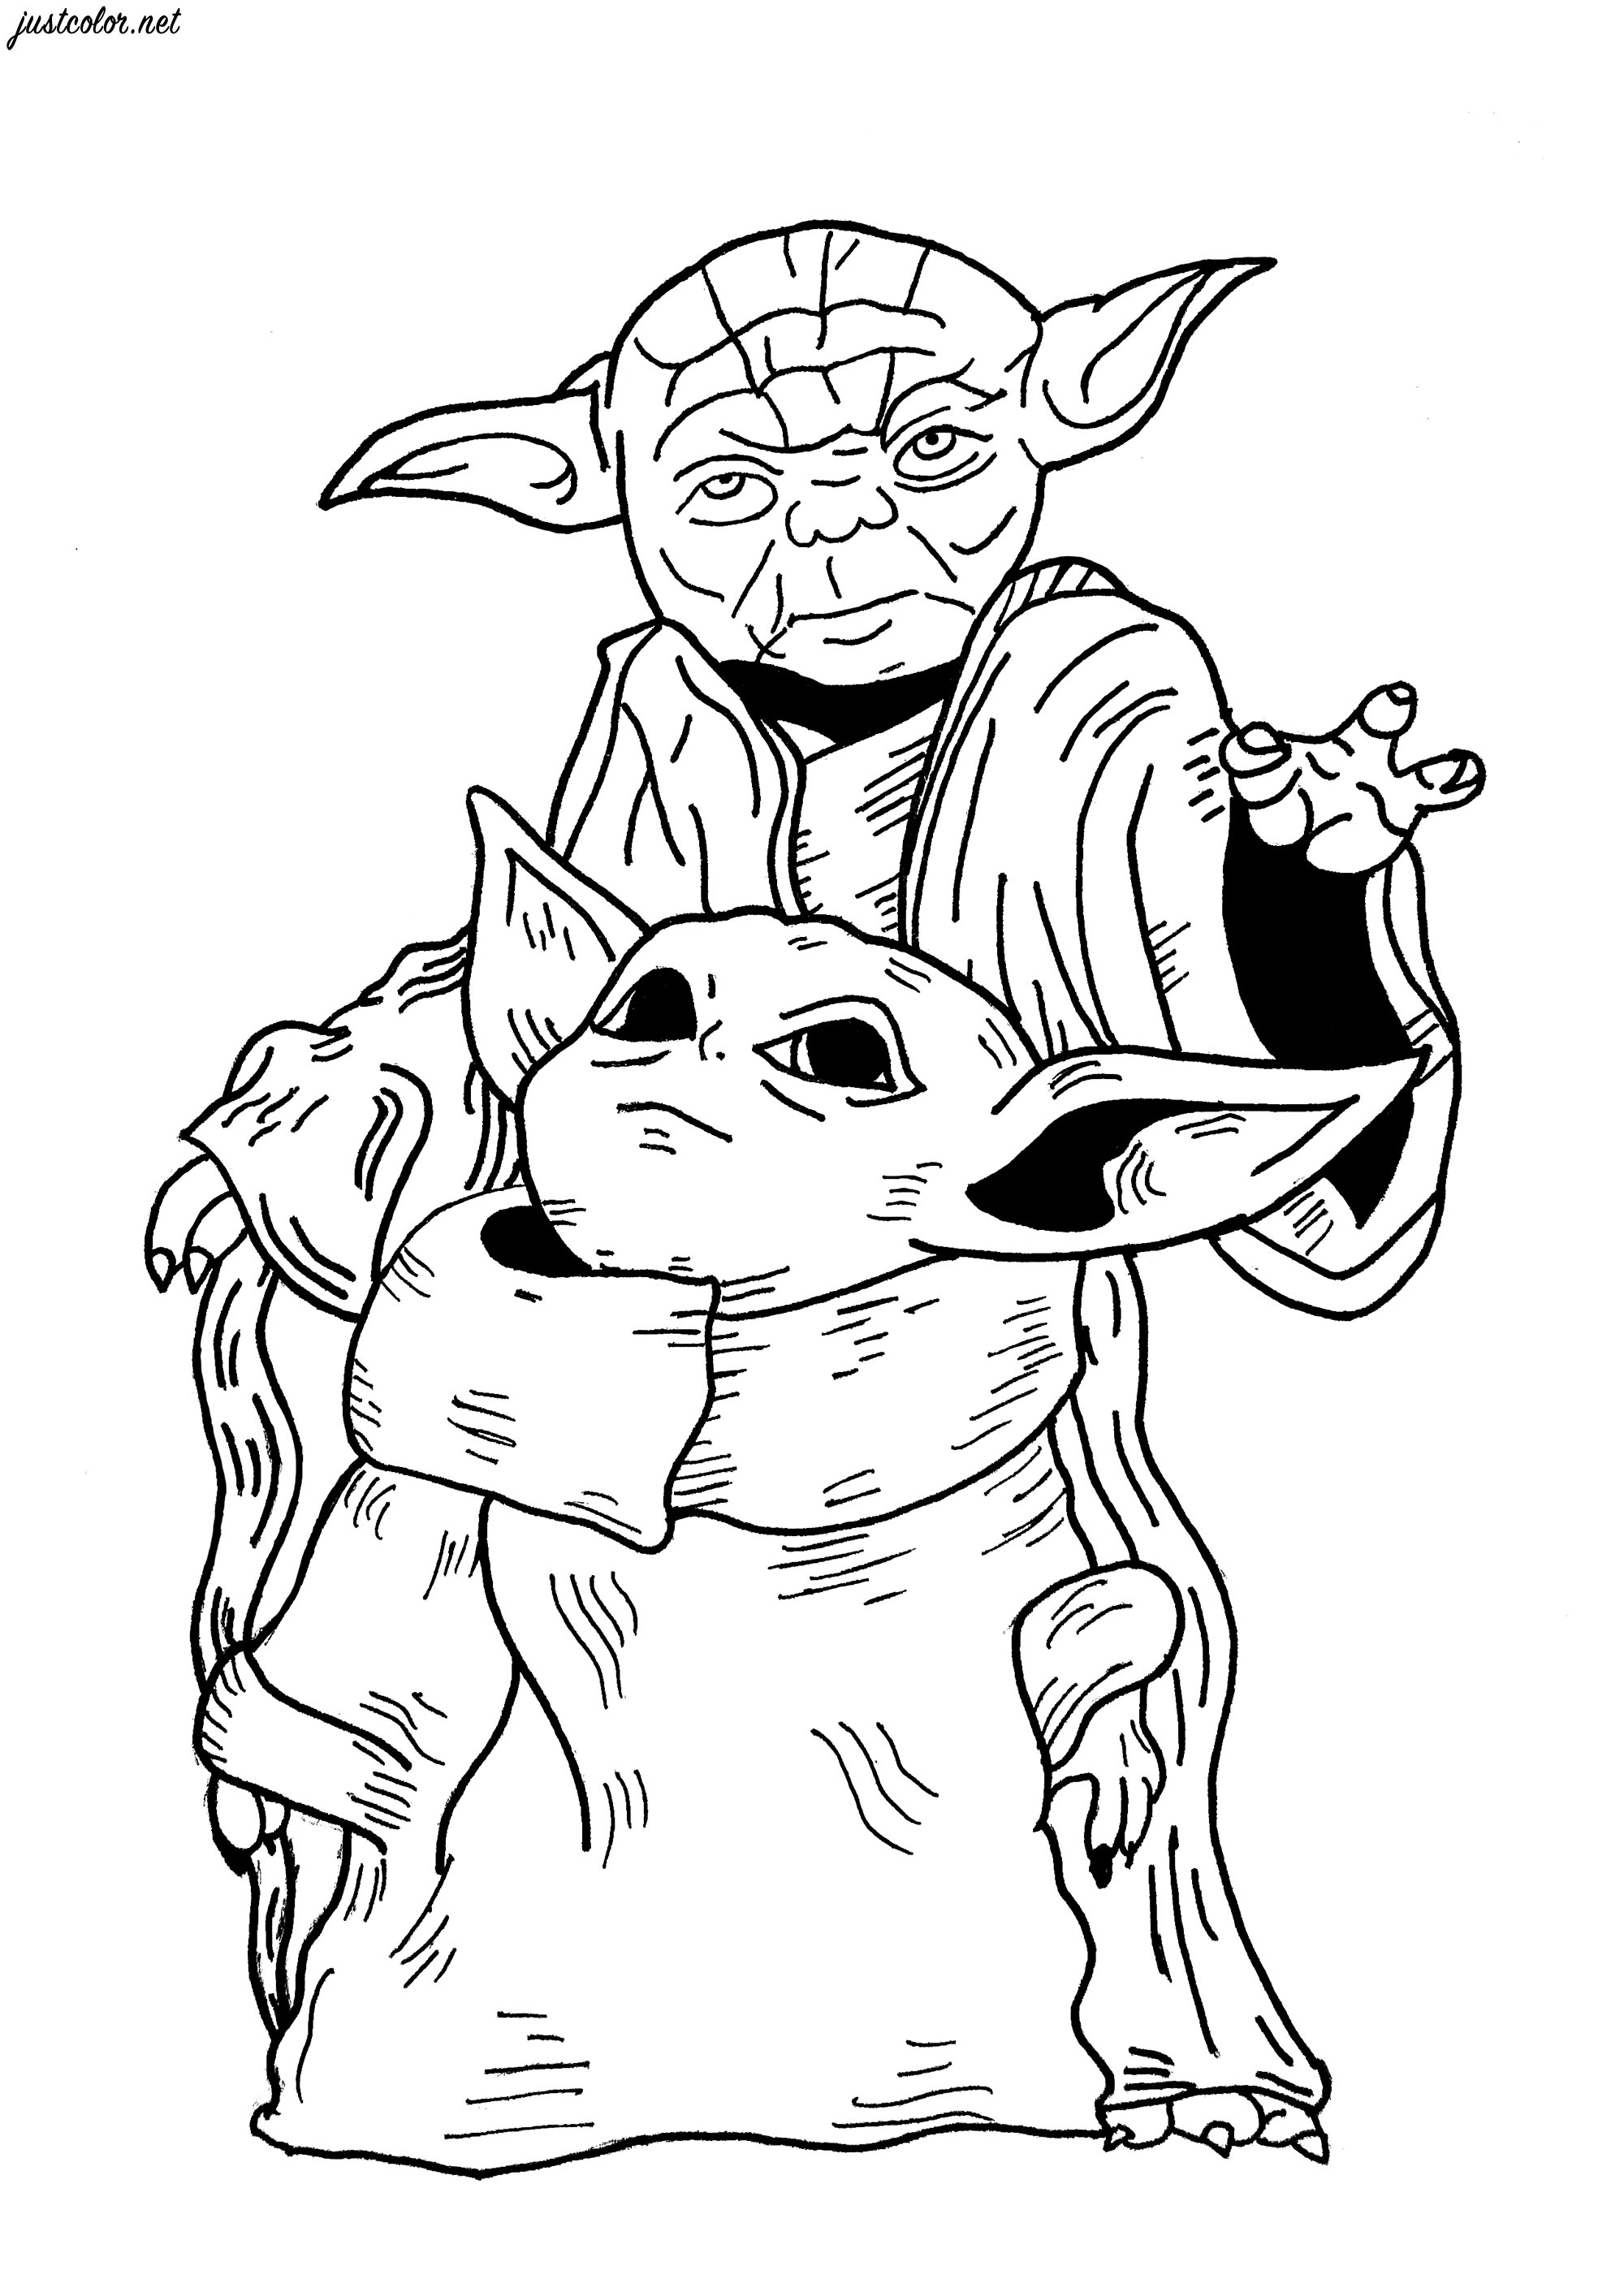 grogu-and-yoda-movies-adult-coloring-pages